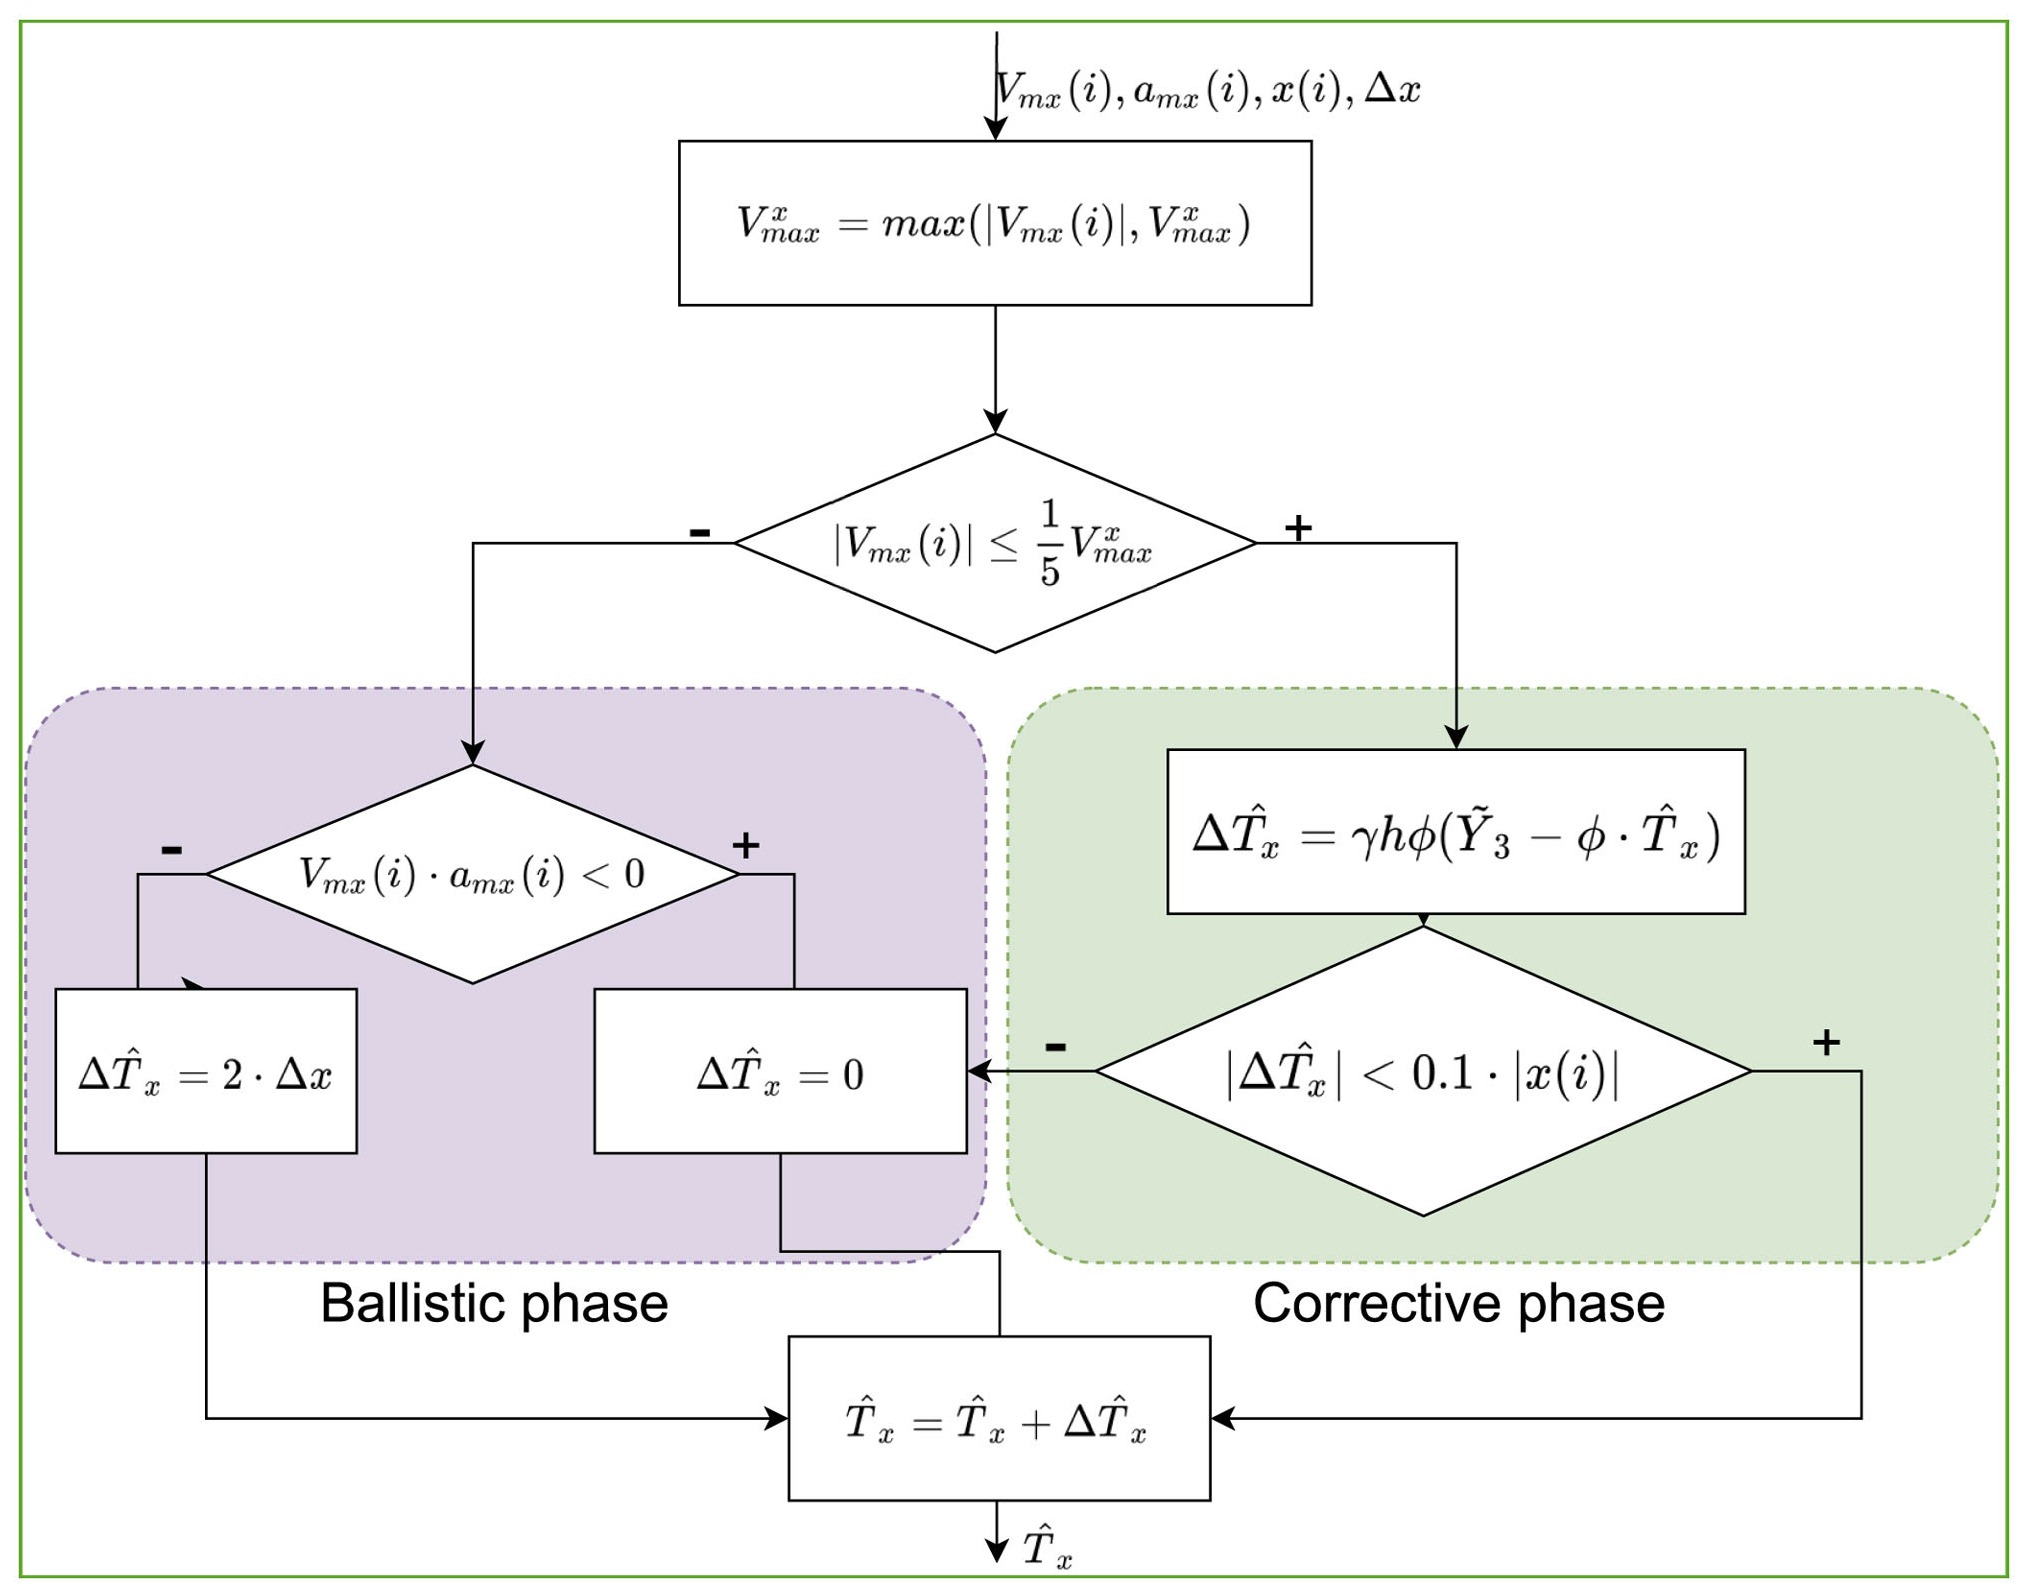 Represents the switched model diagram to takes into account the commutation between the correction and ballistic phases in pointing tasks.